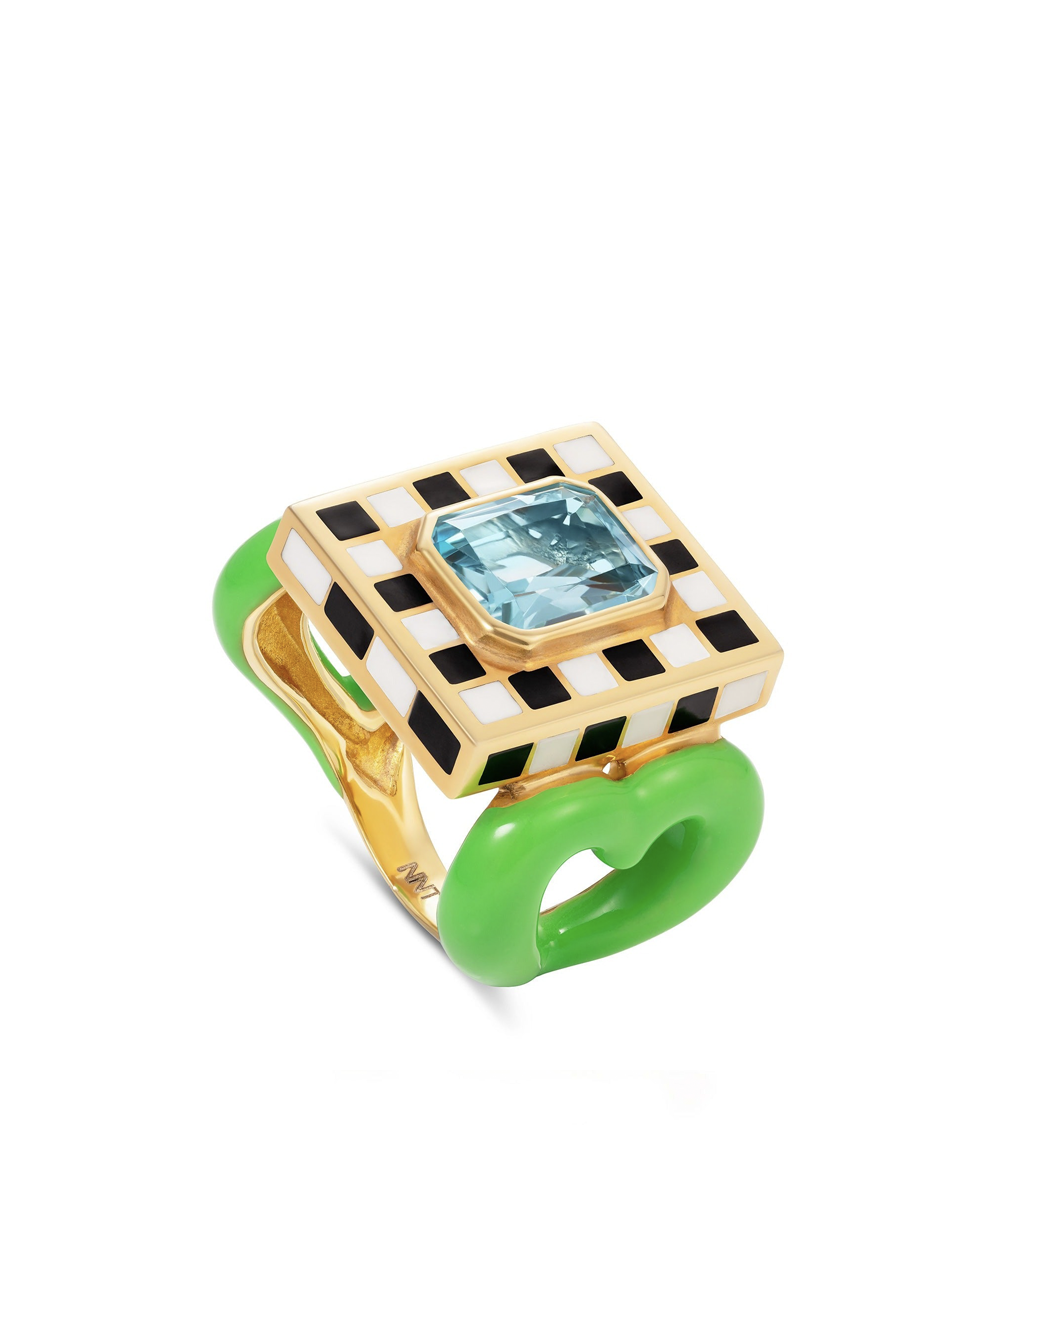 Let’s Play Chess Neon Ring